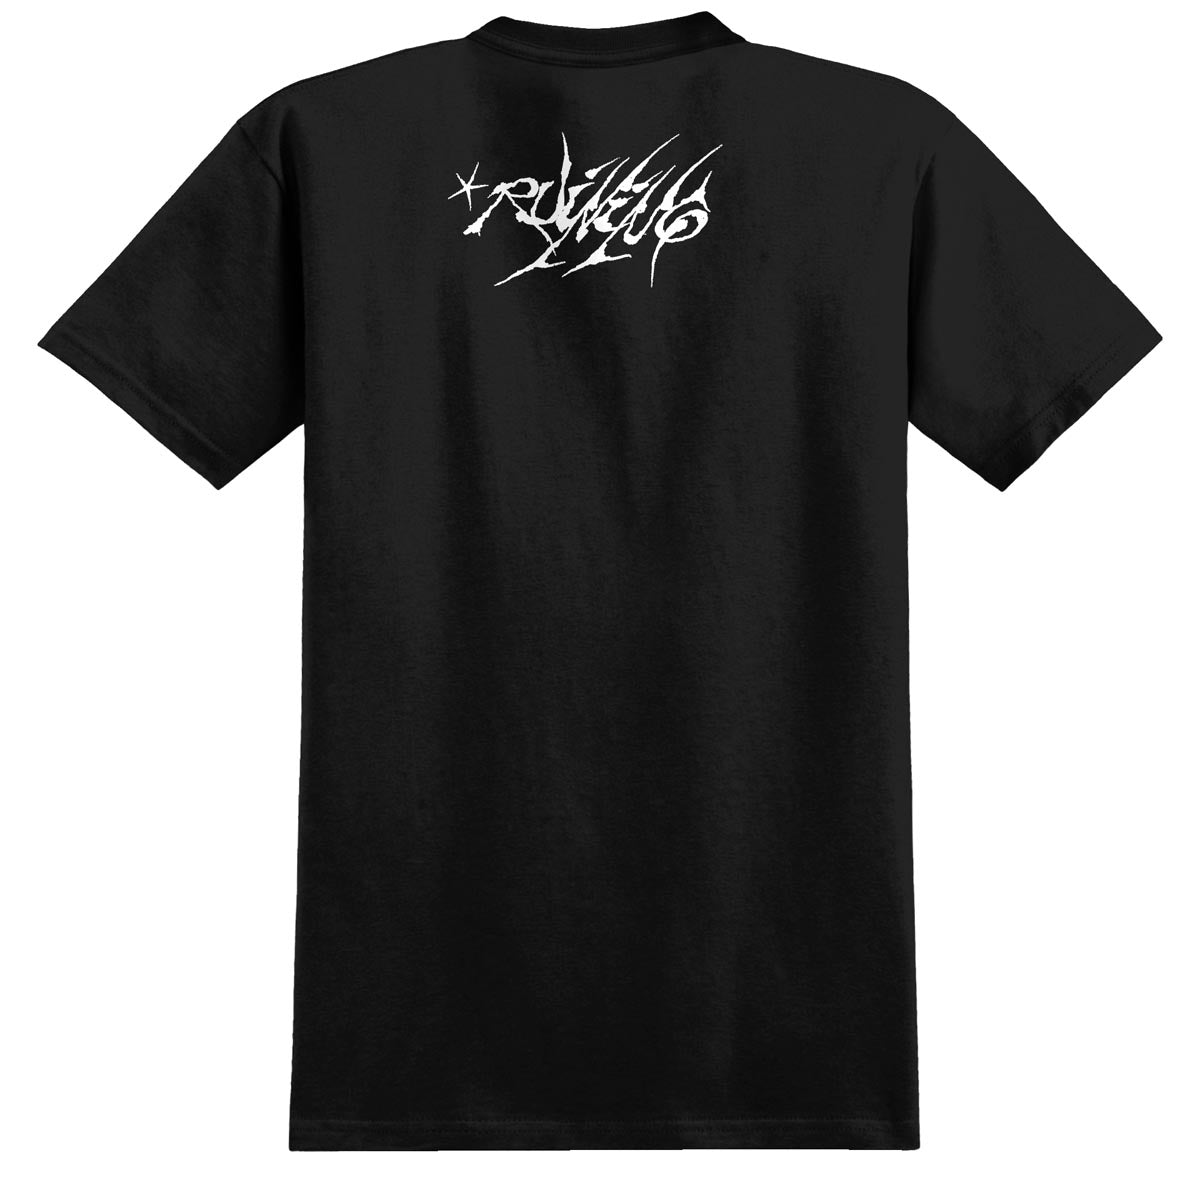 There Heart T-Shirt - Black/White image 2